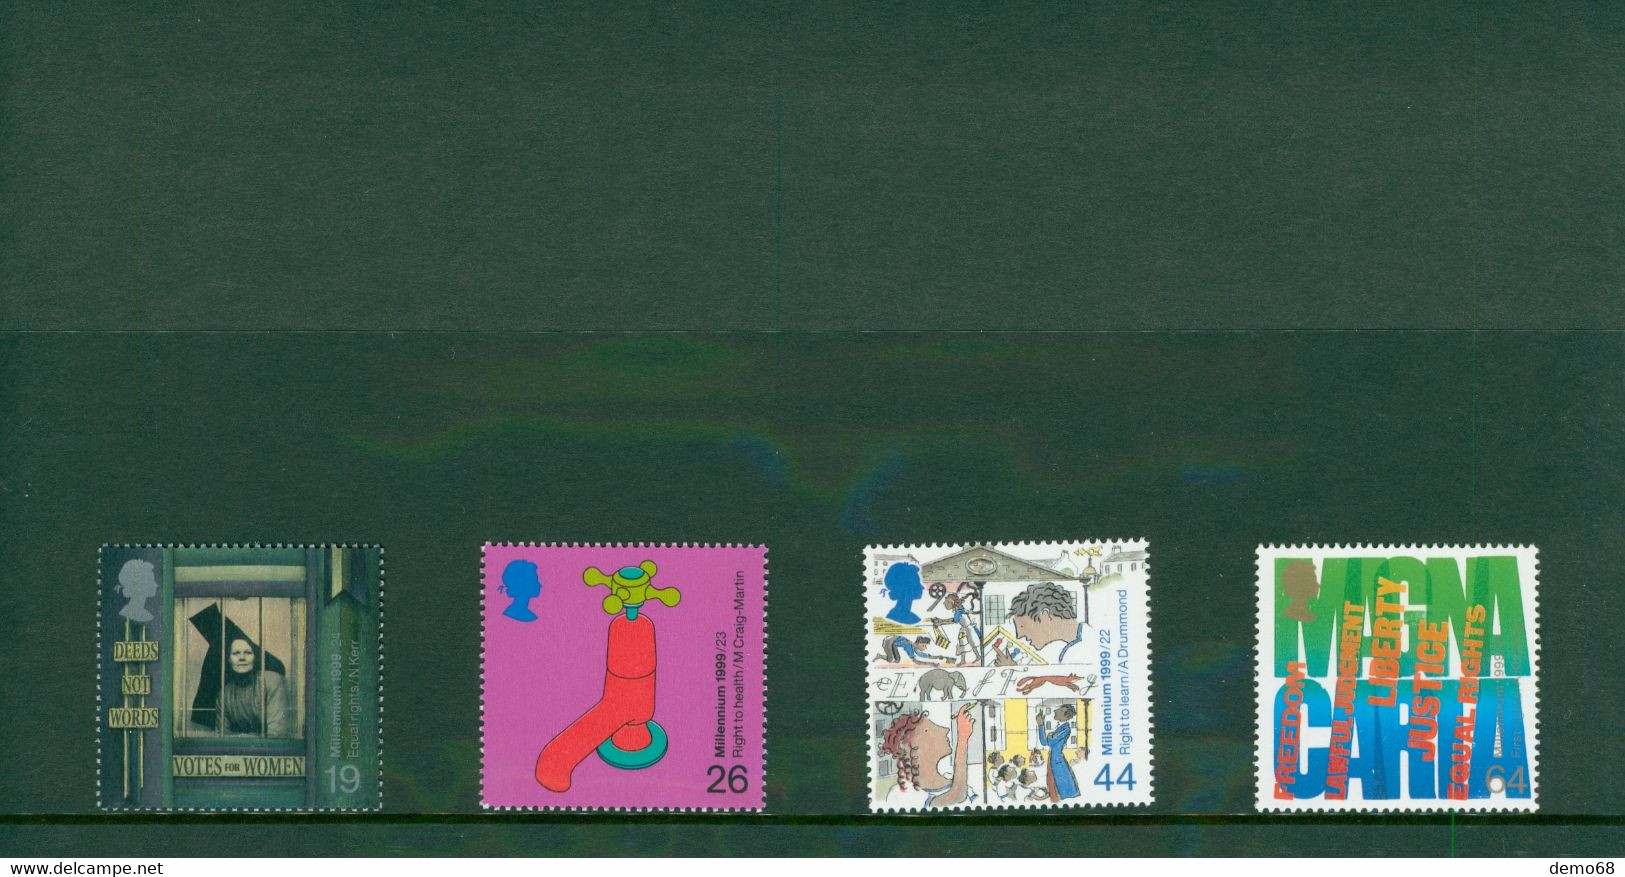 Stamp Timbre England Great Britain British Citizens' Tale Not Vote NoVoceFeuillet Neuf 4 Timbre S Royal Mail Mint Stamps - Verzamelingen